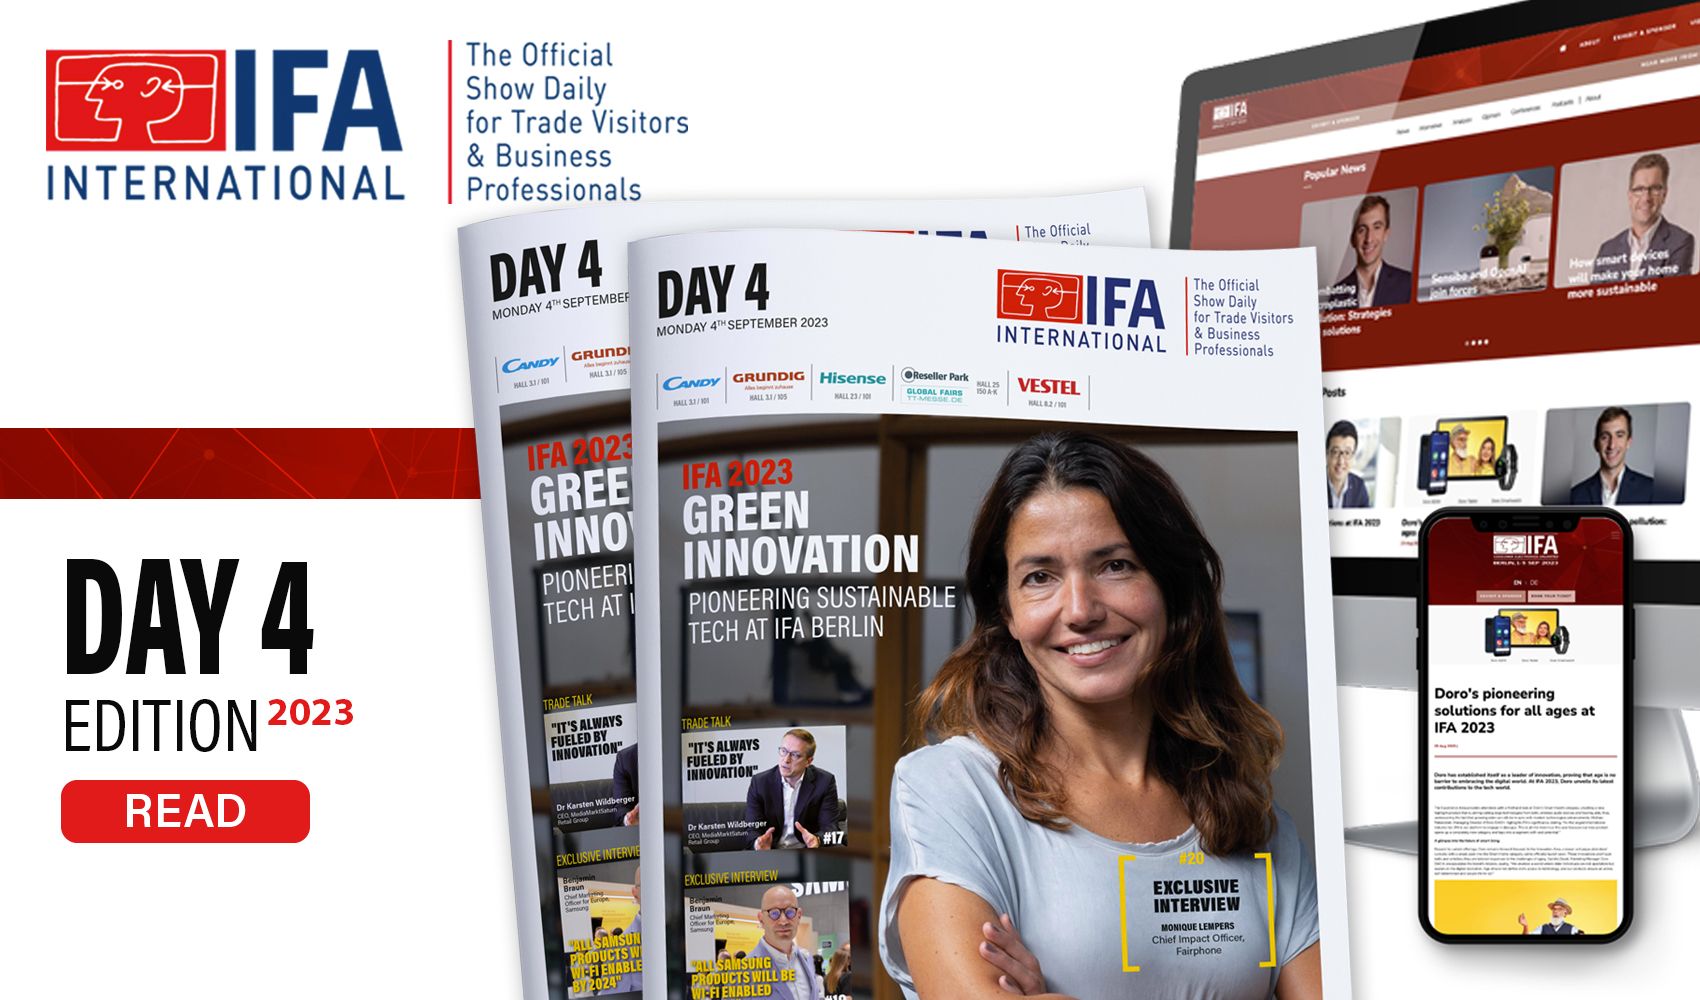 DISCOVER THE DAY 4 EDITION OF IFA INTERNATIONAL!